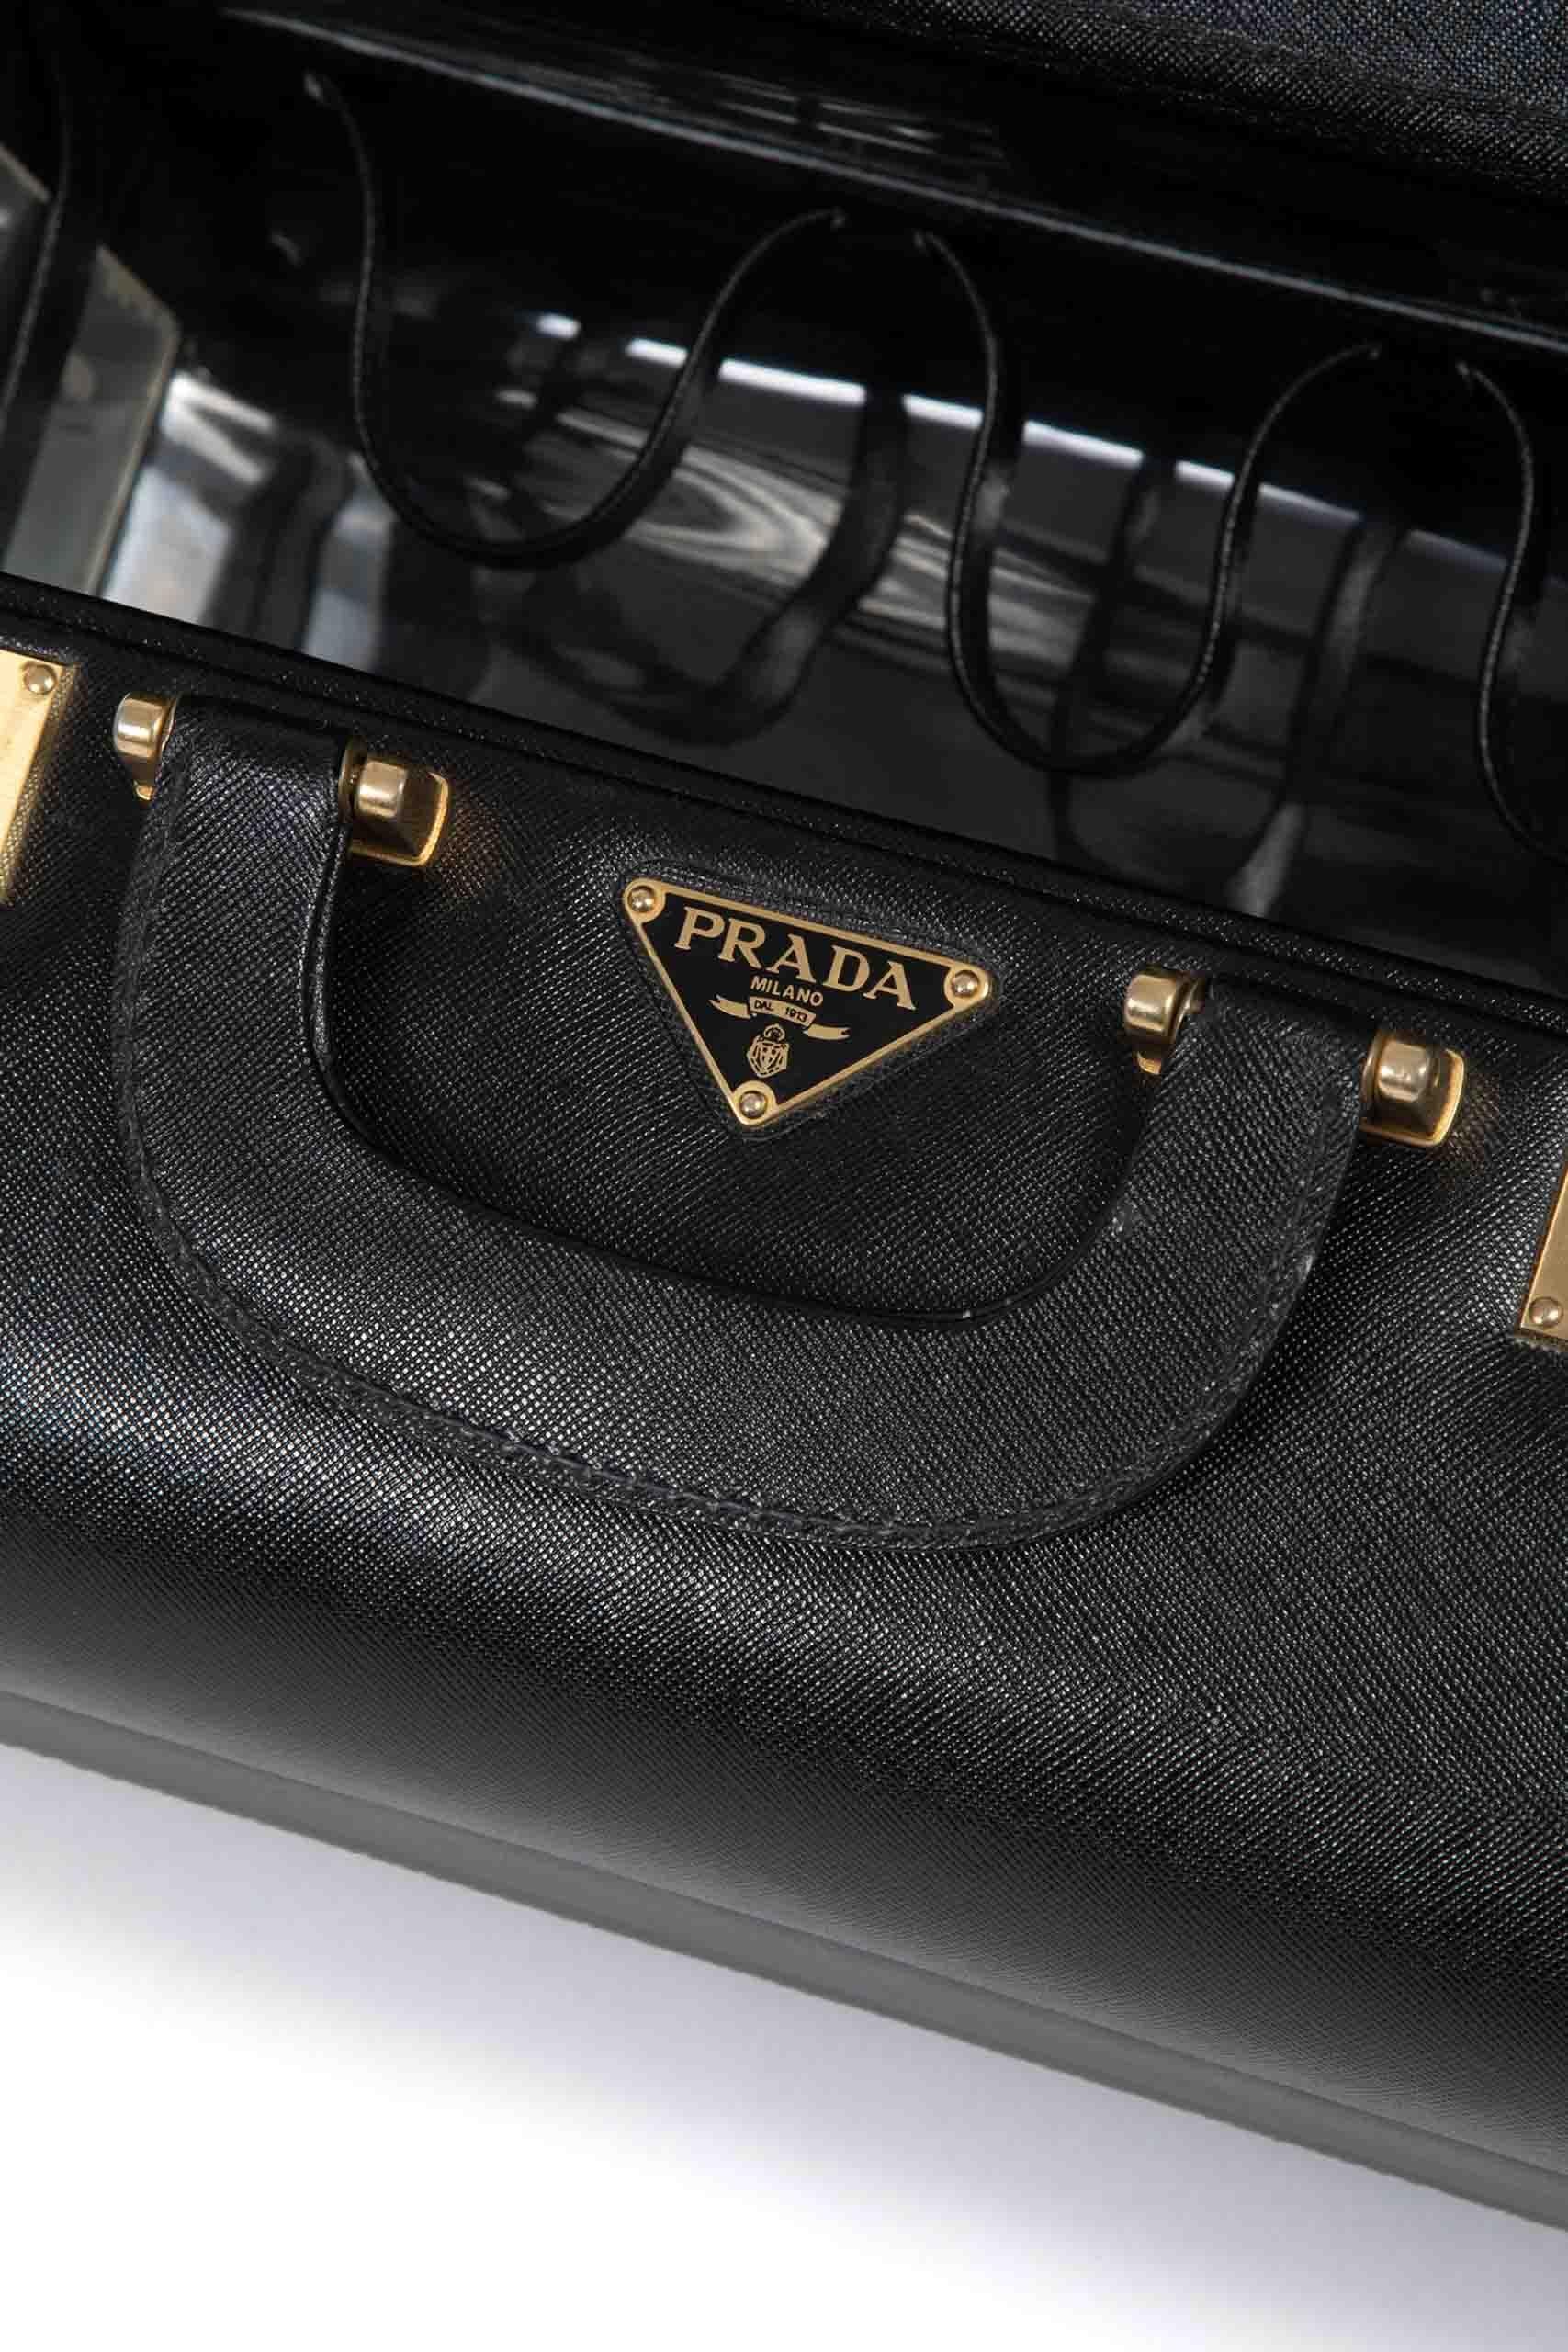 Beautiful Prada beautycase made in the late 1980s. It's crafted in the signature black Saffiano leather, trademark of the Prada luggages an leather goods. The beautycase features a double leather handle, a combination number lock, metal supports on